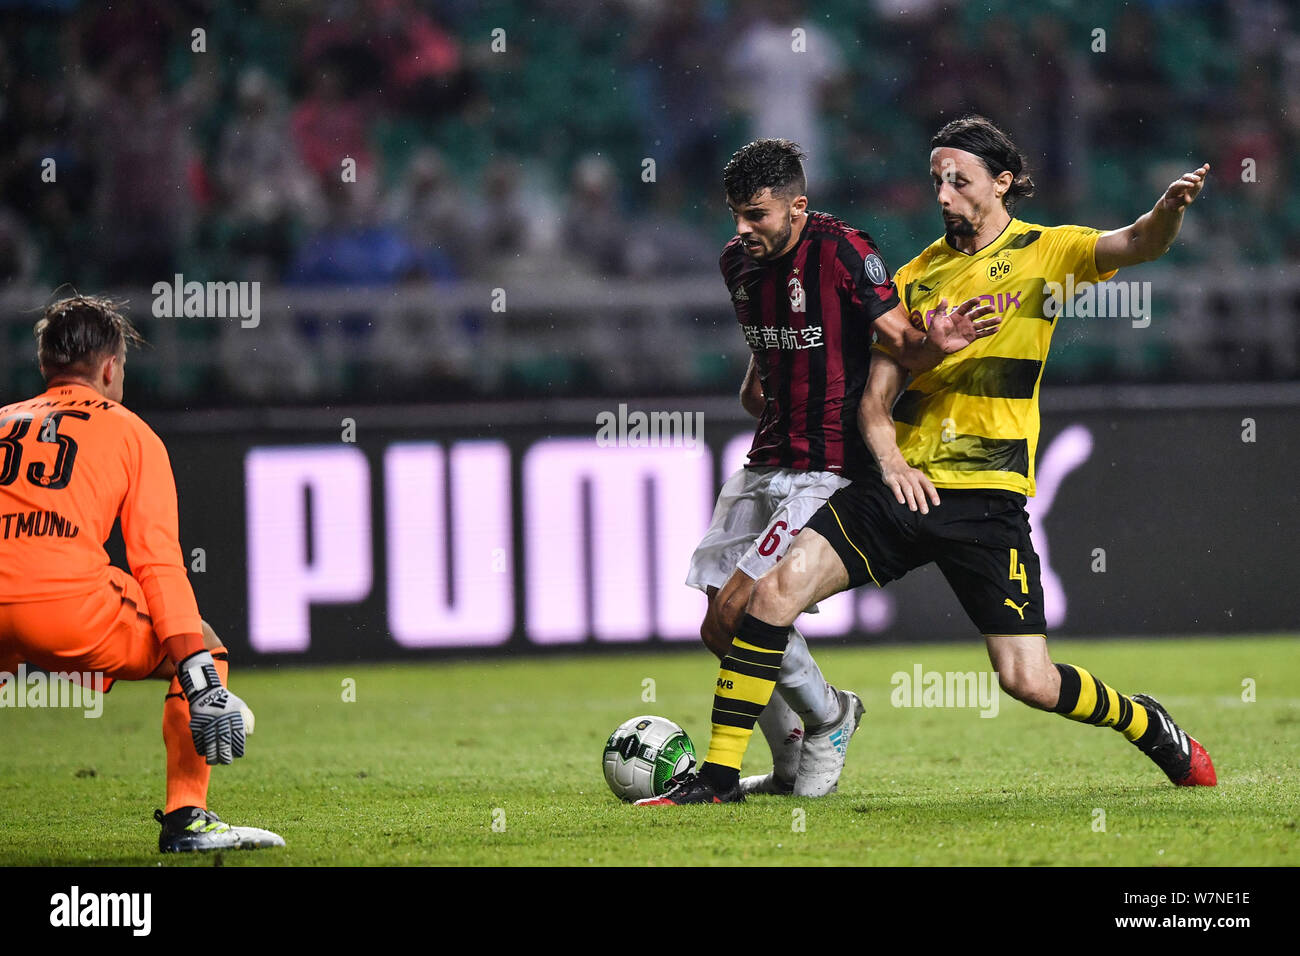 Italian football player Patrick Cutrone of AC Milan, left, challenges  Serbian football player Neven Subotic of Borussia Dortmund during the  Guangzhou Stock Photo - Alamy